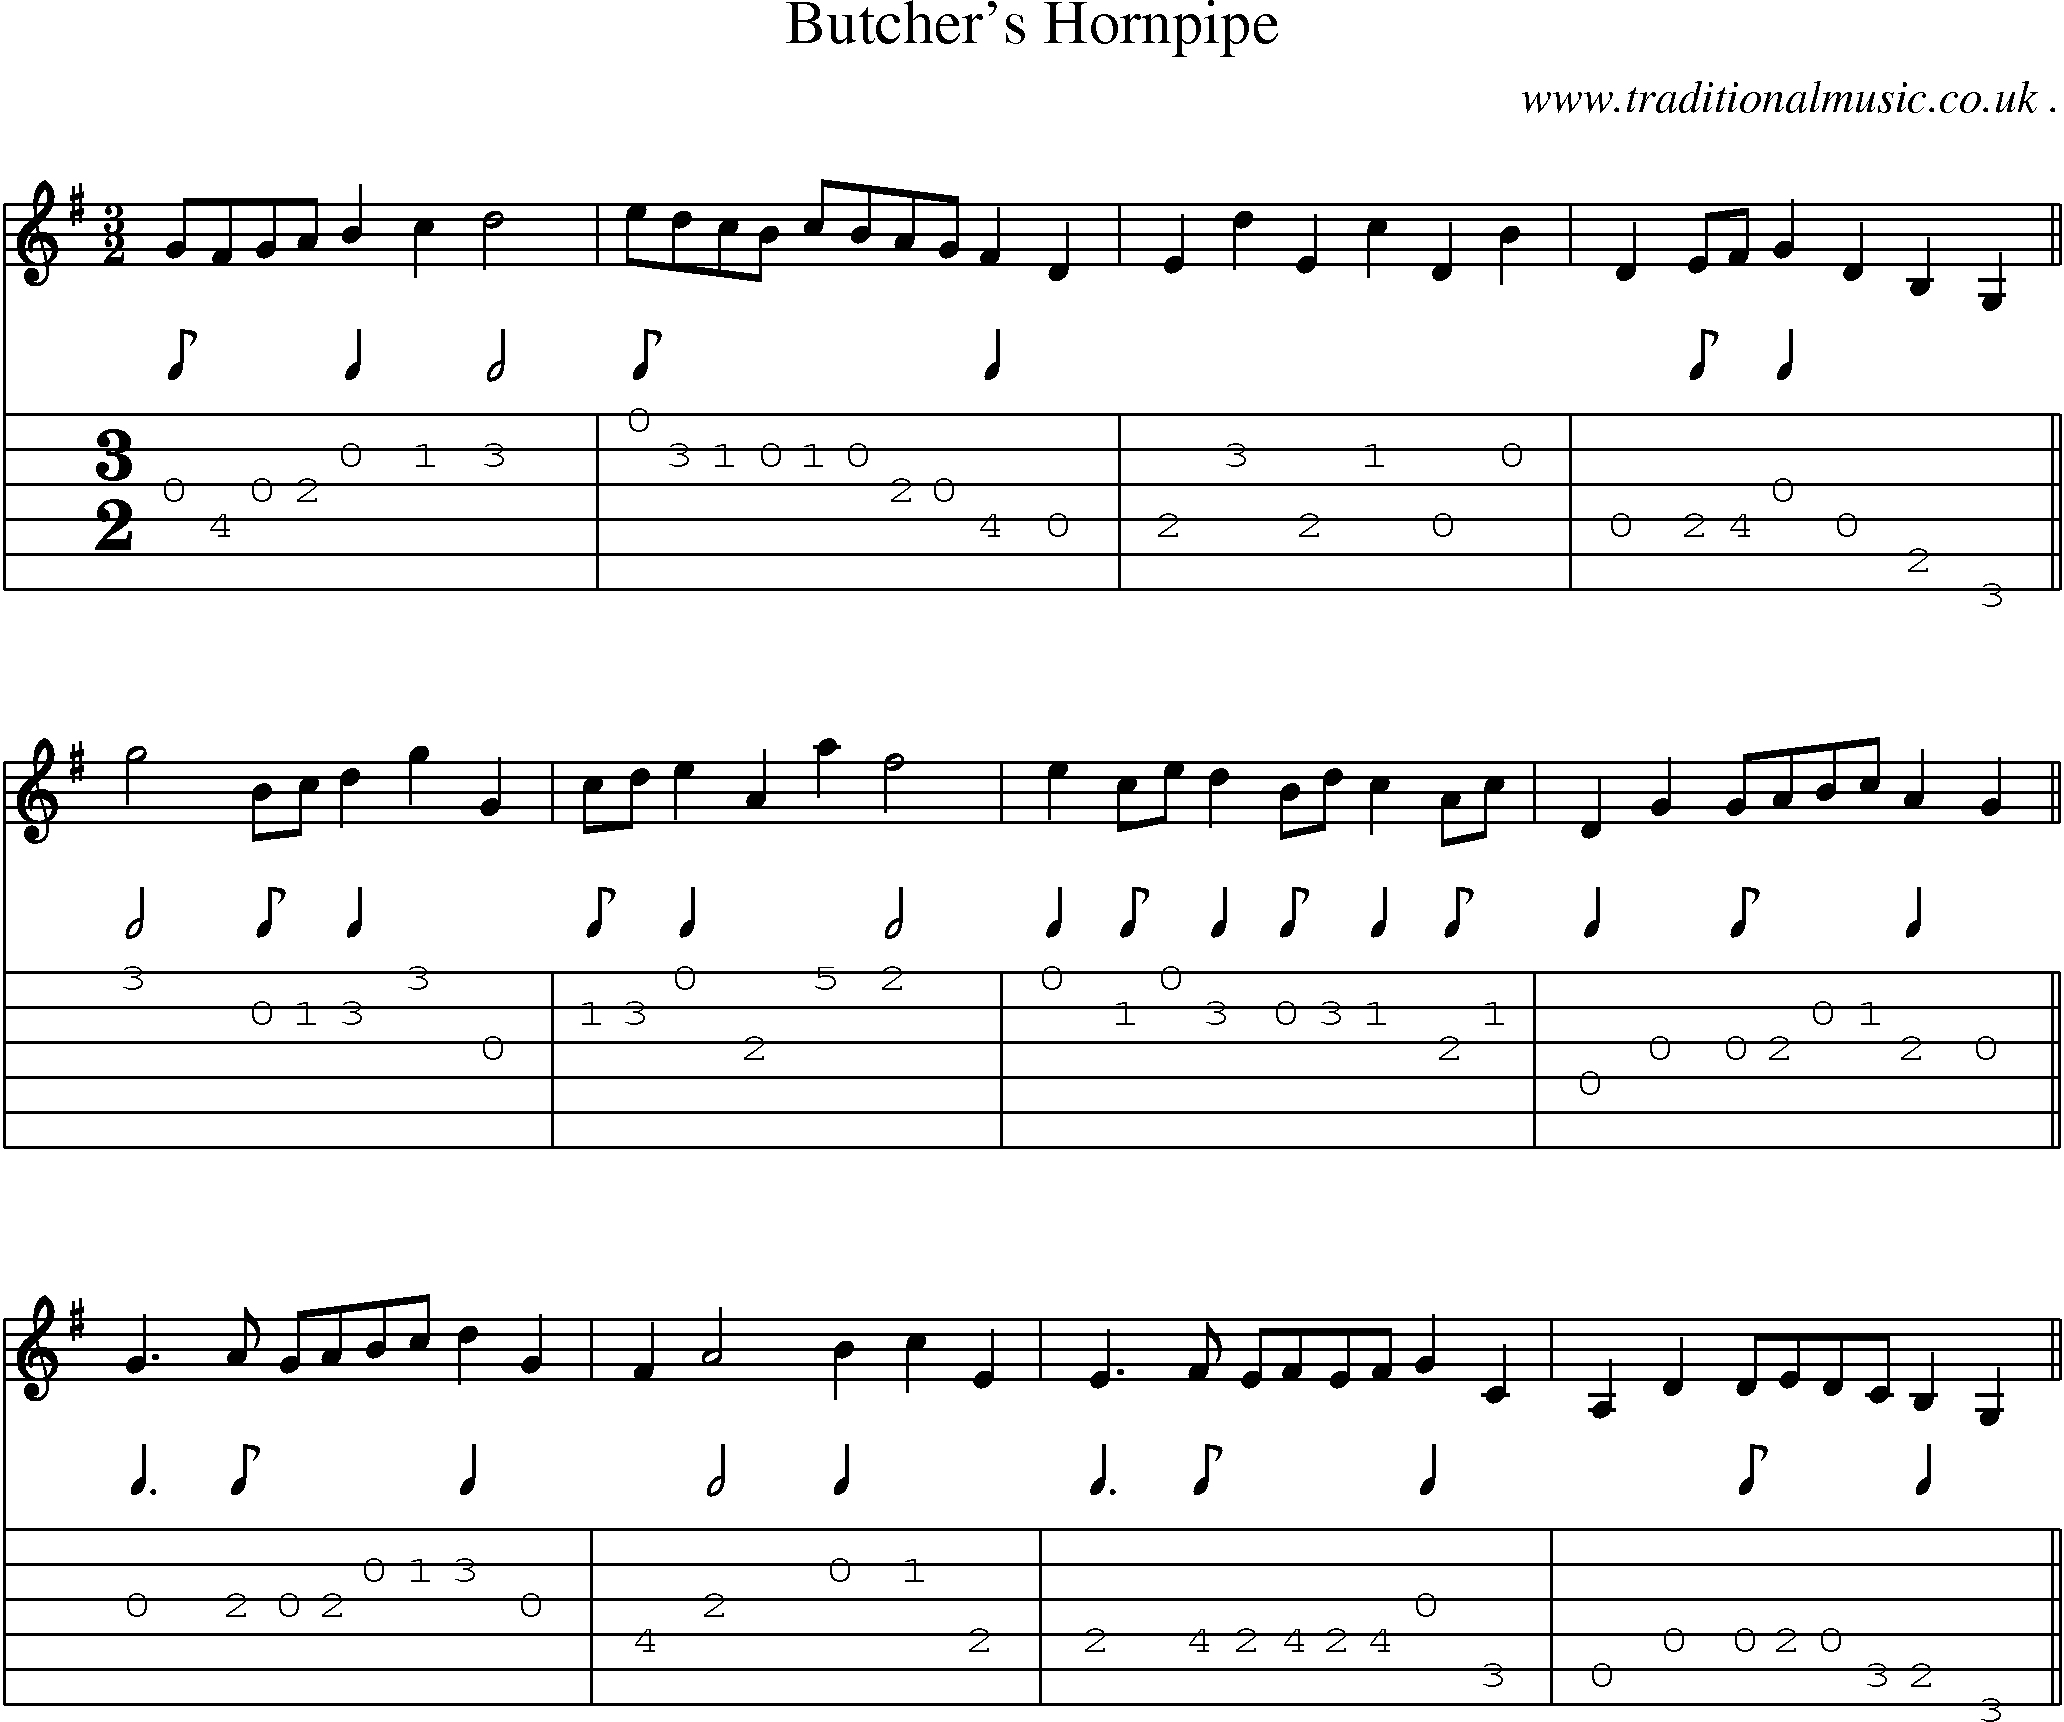 Sheet-Music and Guitar Tabs for Butchers Hornpipe